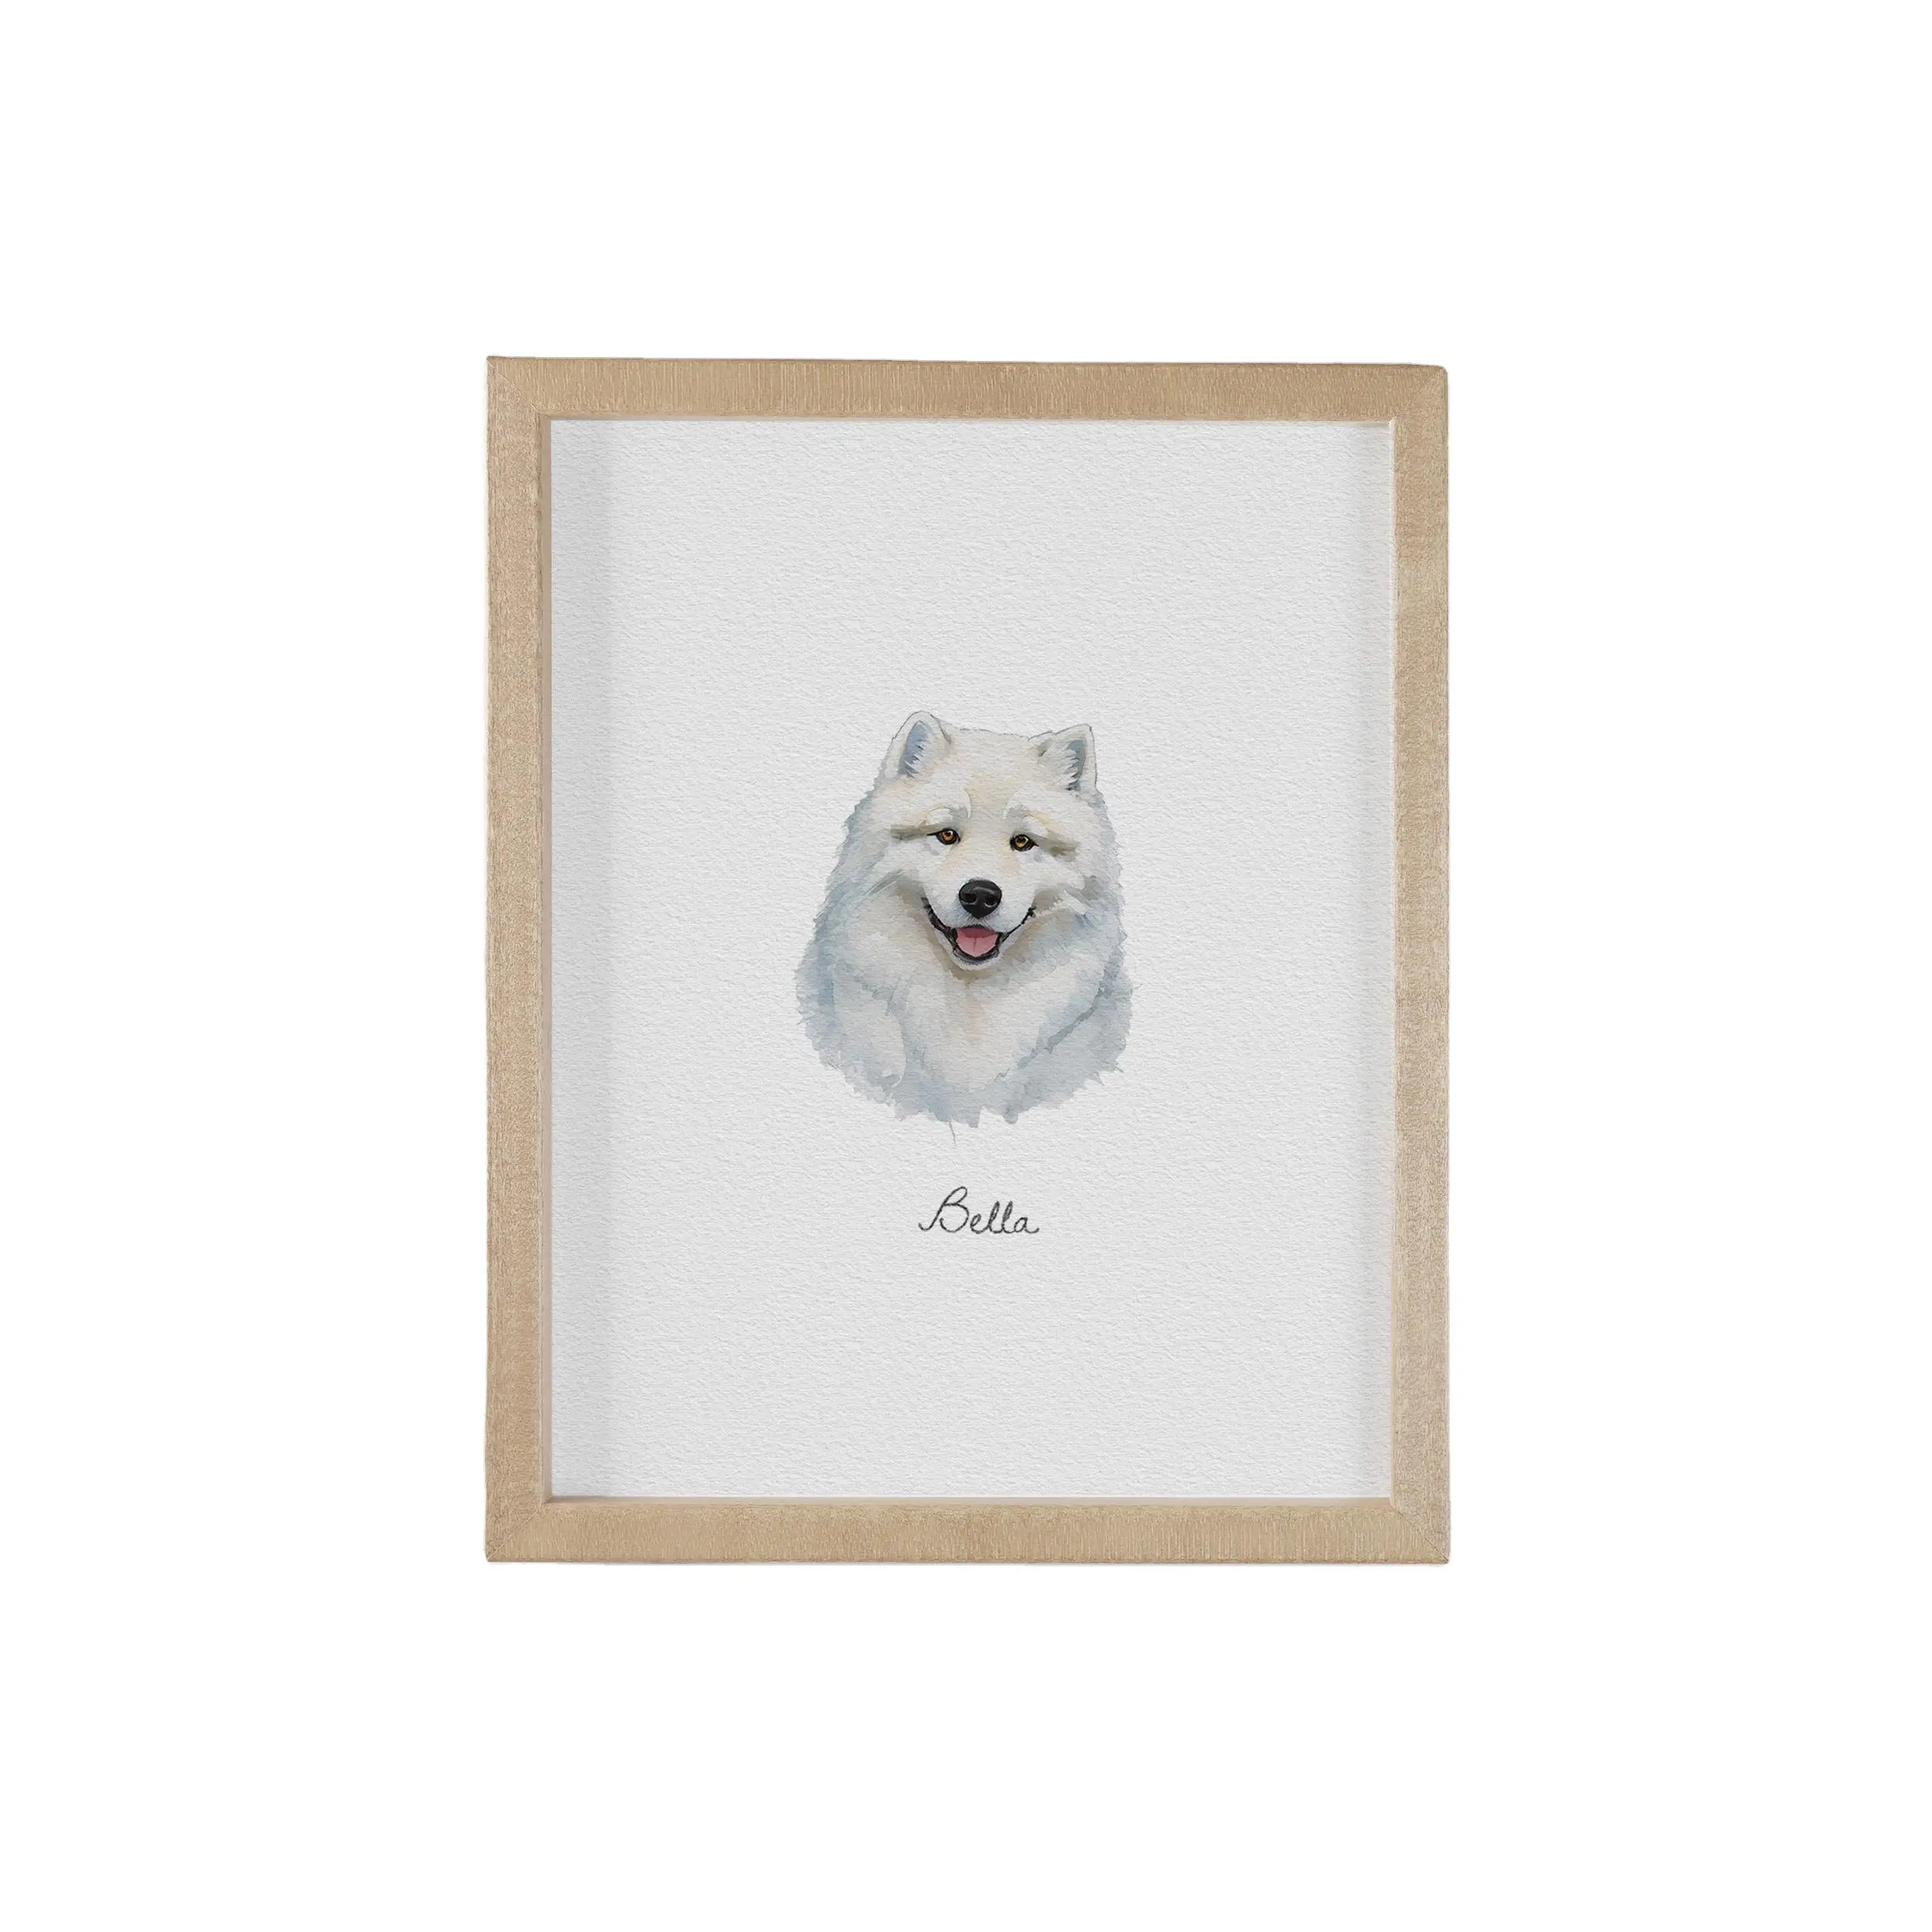 Custom Mini Watercolor Cat Portrait Cat Lover Gift and Memorial for Pet Loss Tiny Paintings and Miniature Art Ornaments